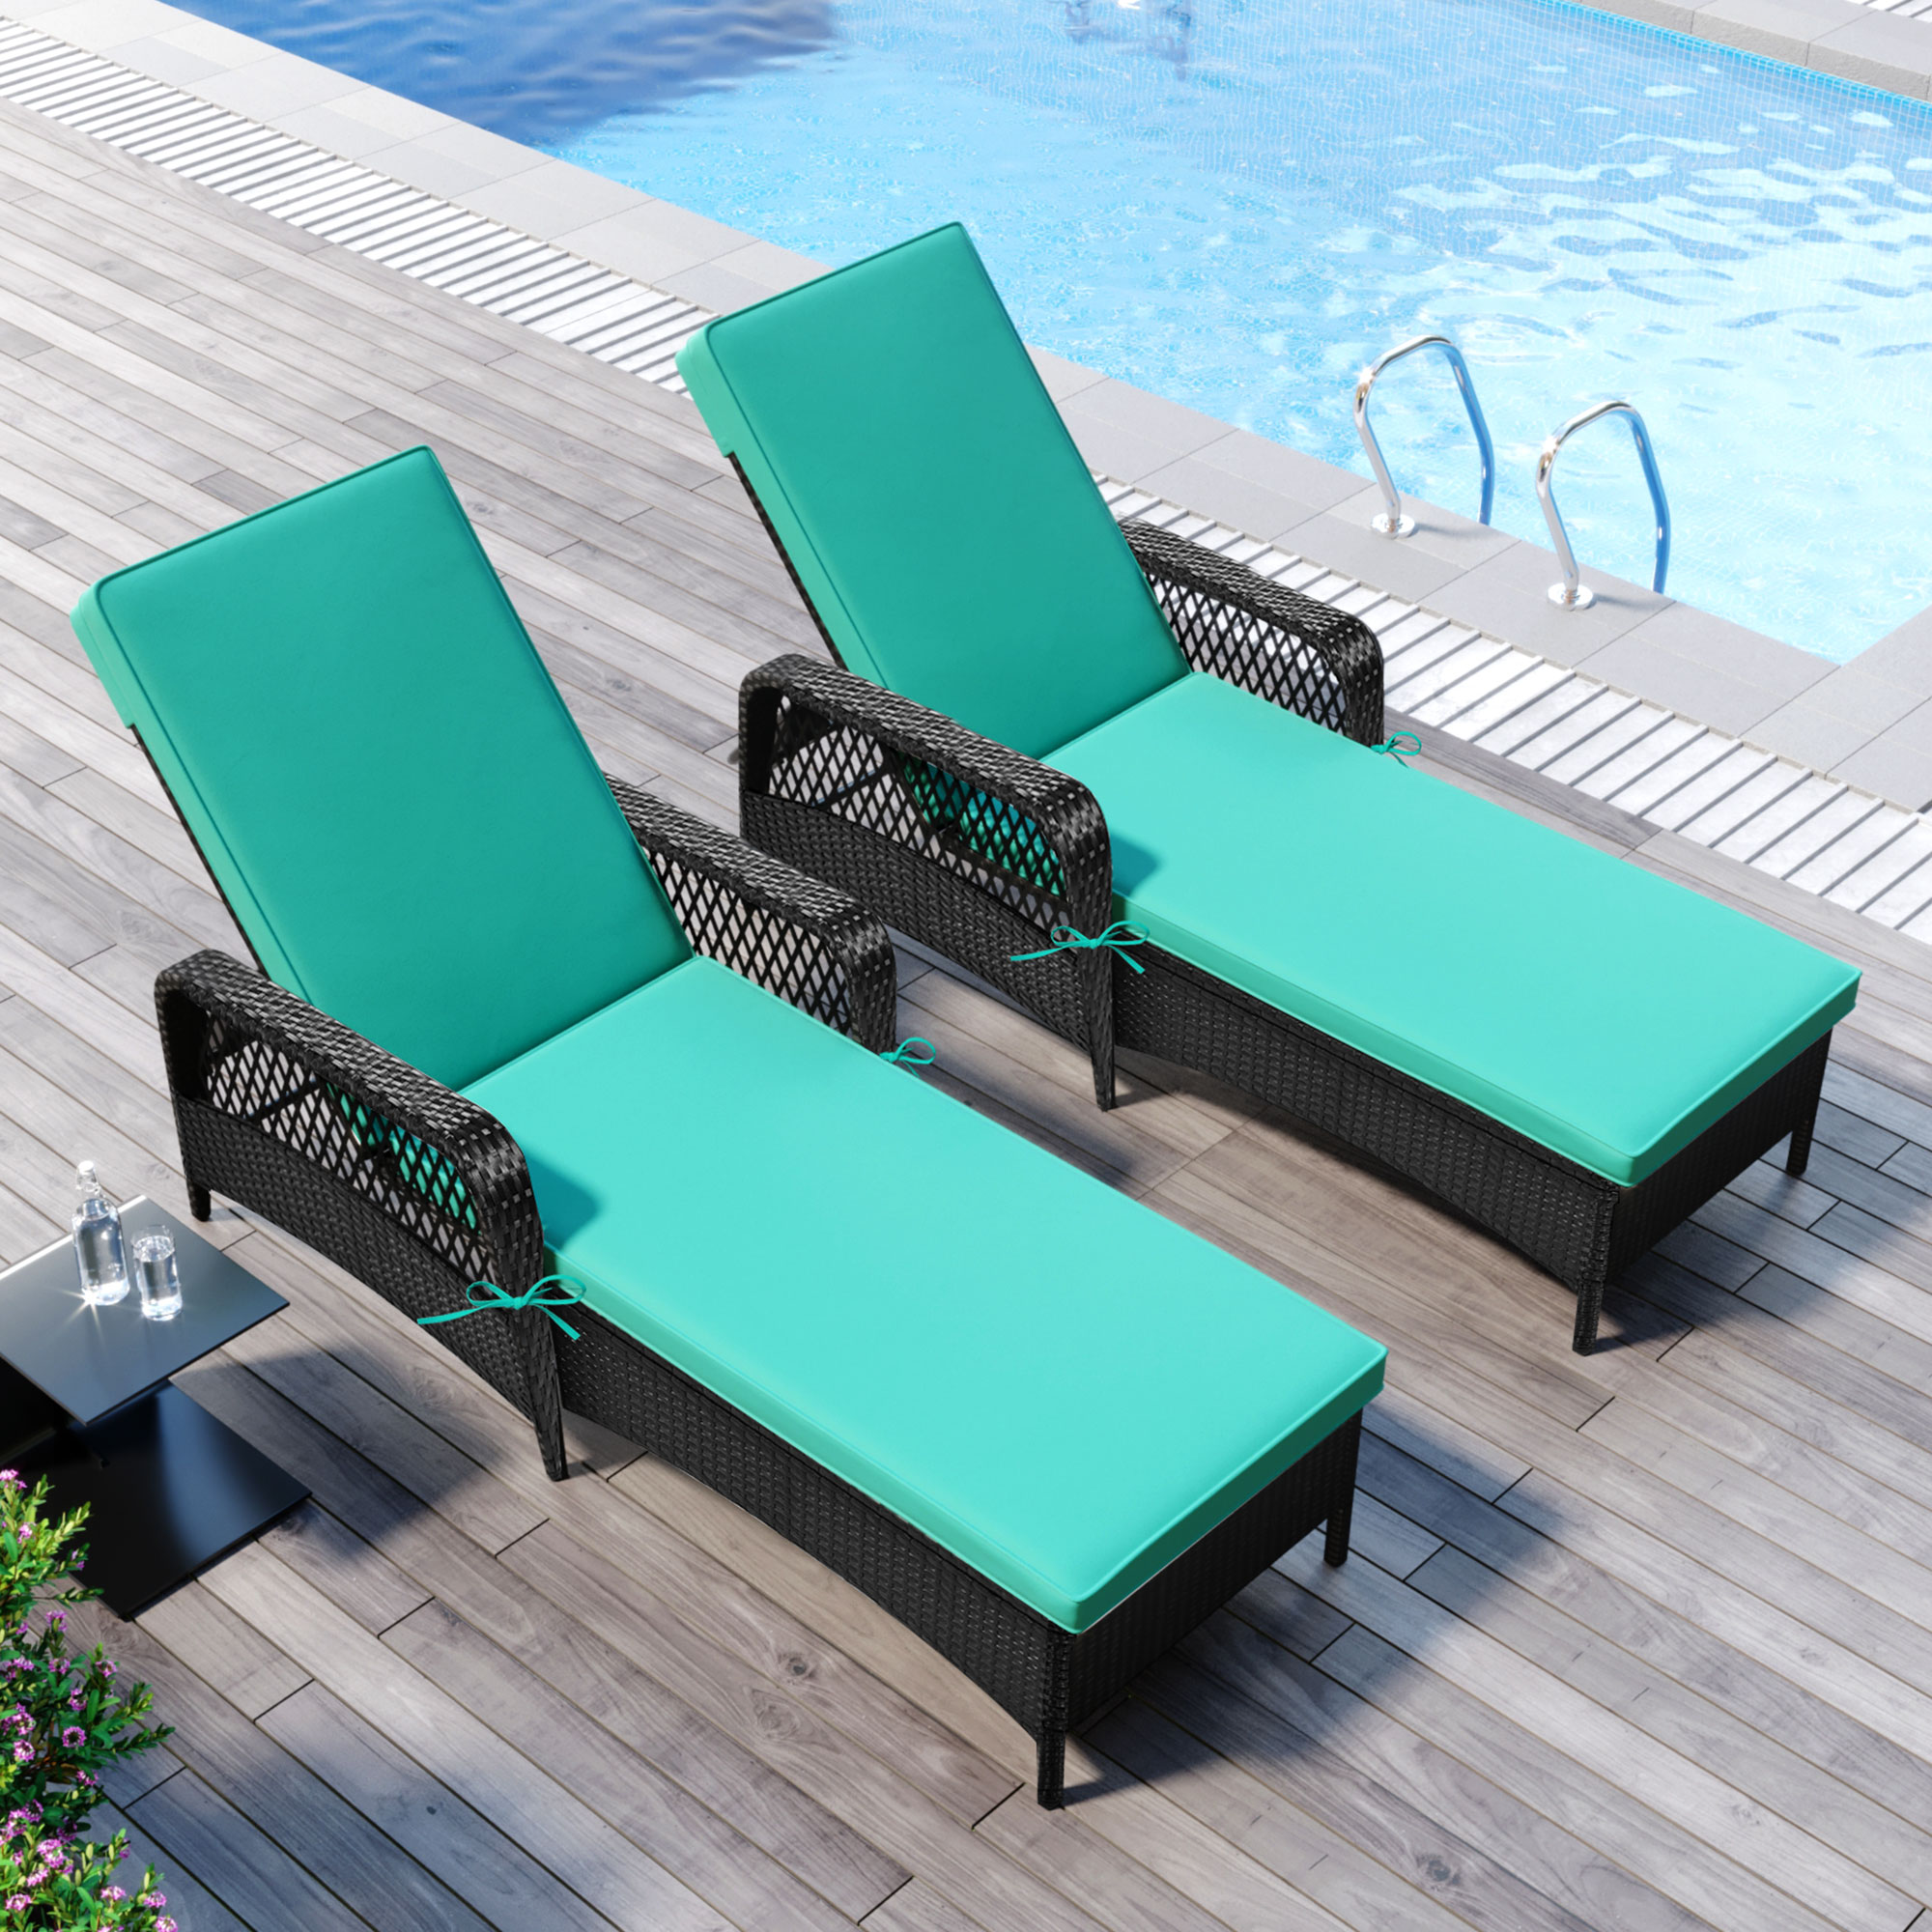 Sesslife Chaise Lounge Chair for Outside, Rattan Wicker Outdoor Lounge Chair, Adjustable Pool Lounge Chair with Thickened Cushion for Patio Poolside Deck(2 Sets) - image 4 of 10